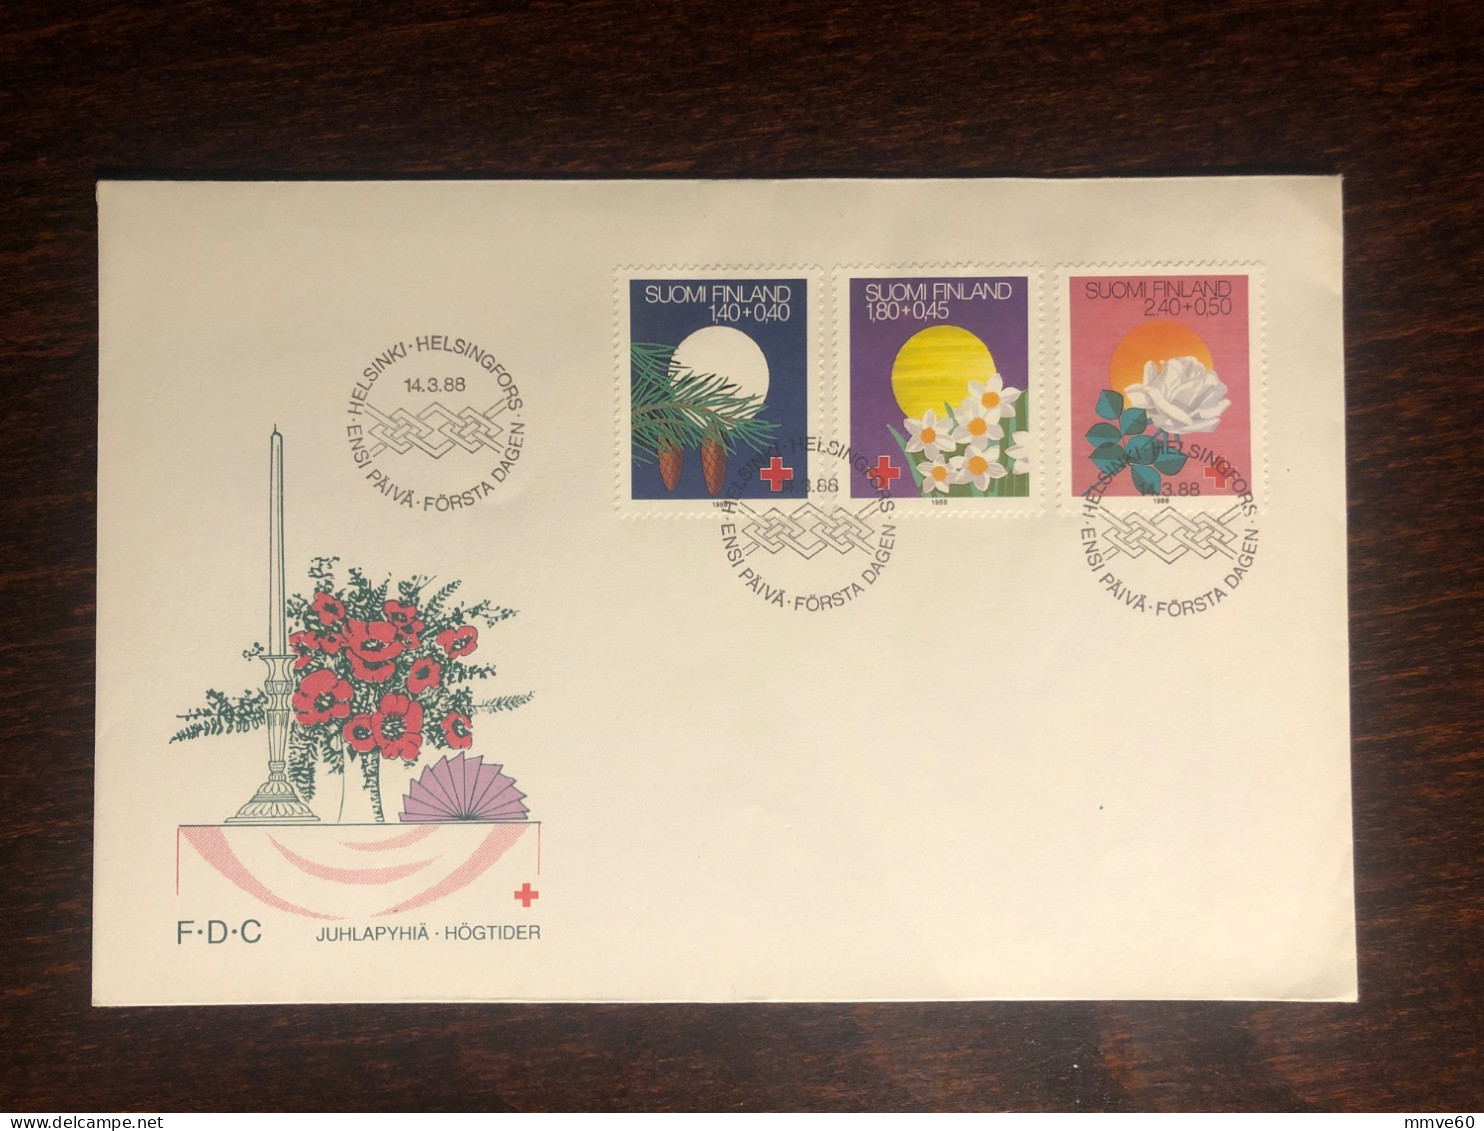 FINLAND FDC 1988 YEAR  RED CROSS HEALTH MEDICINE - Covers & Documents